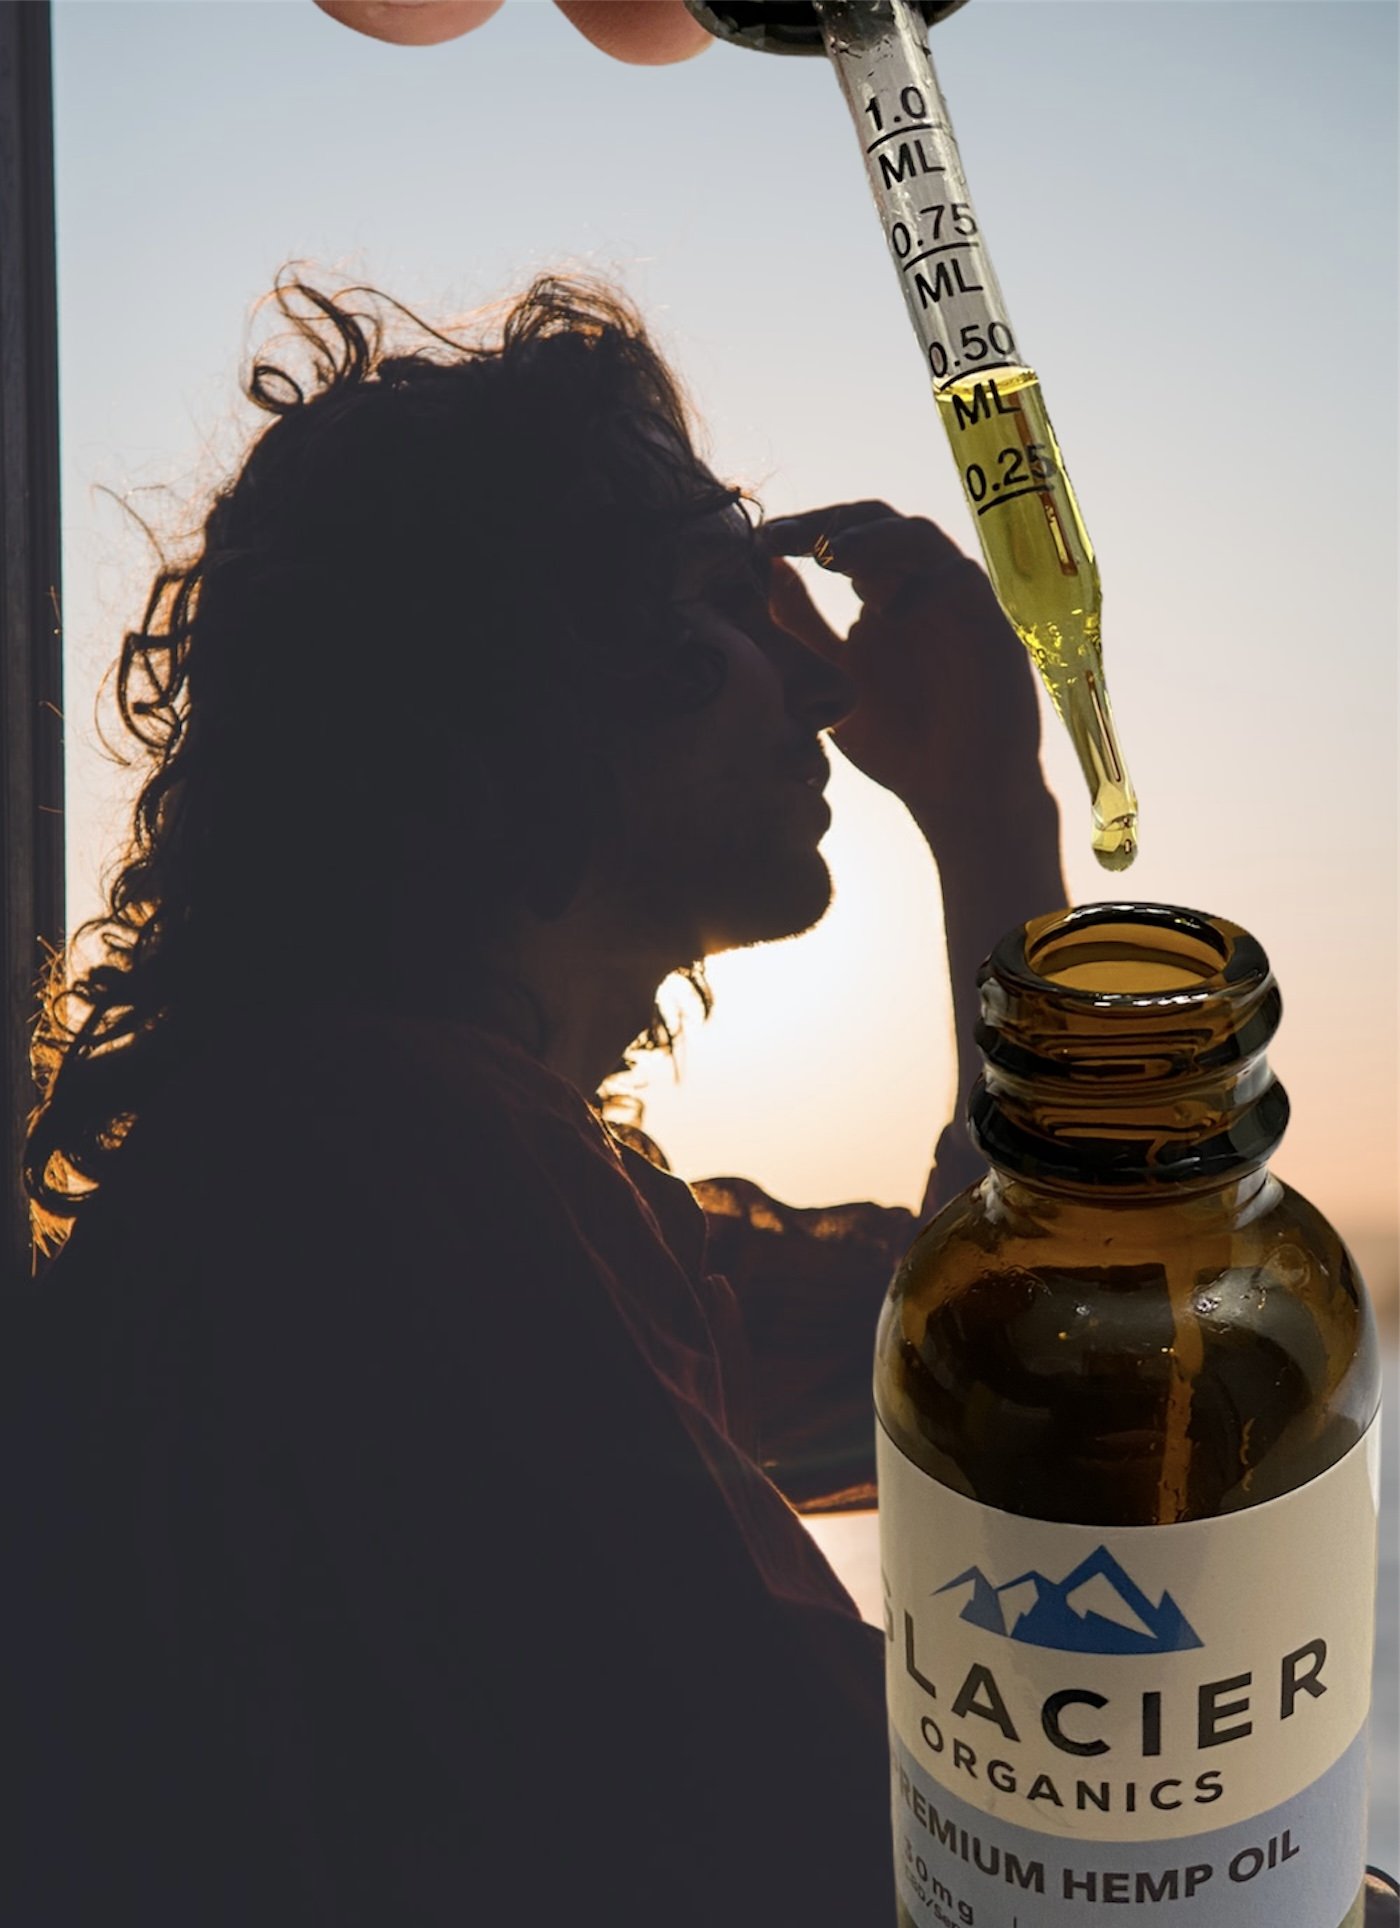 How to use CBD Oil for Anxiety?